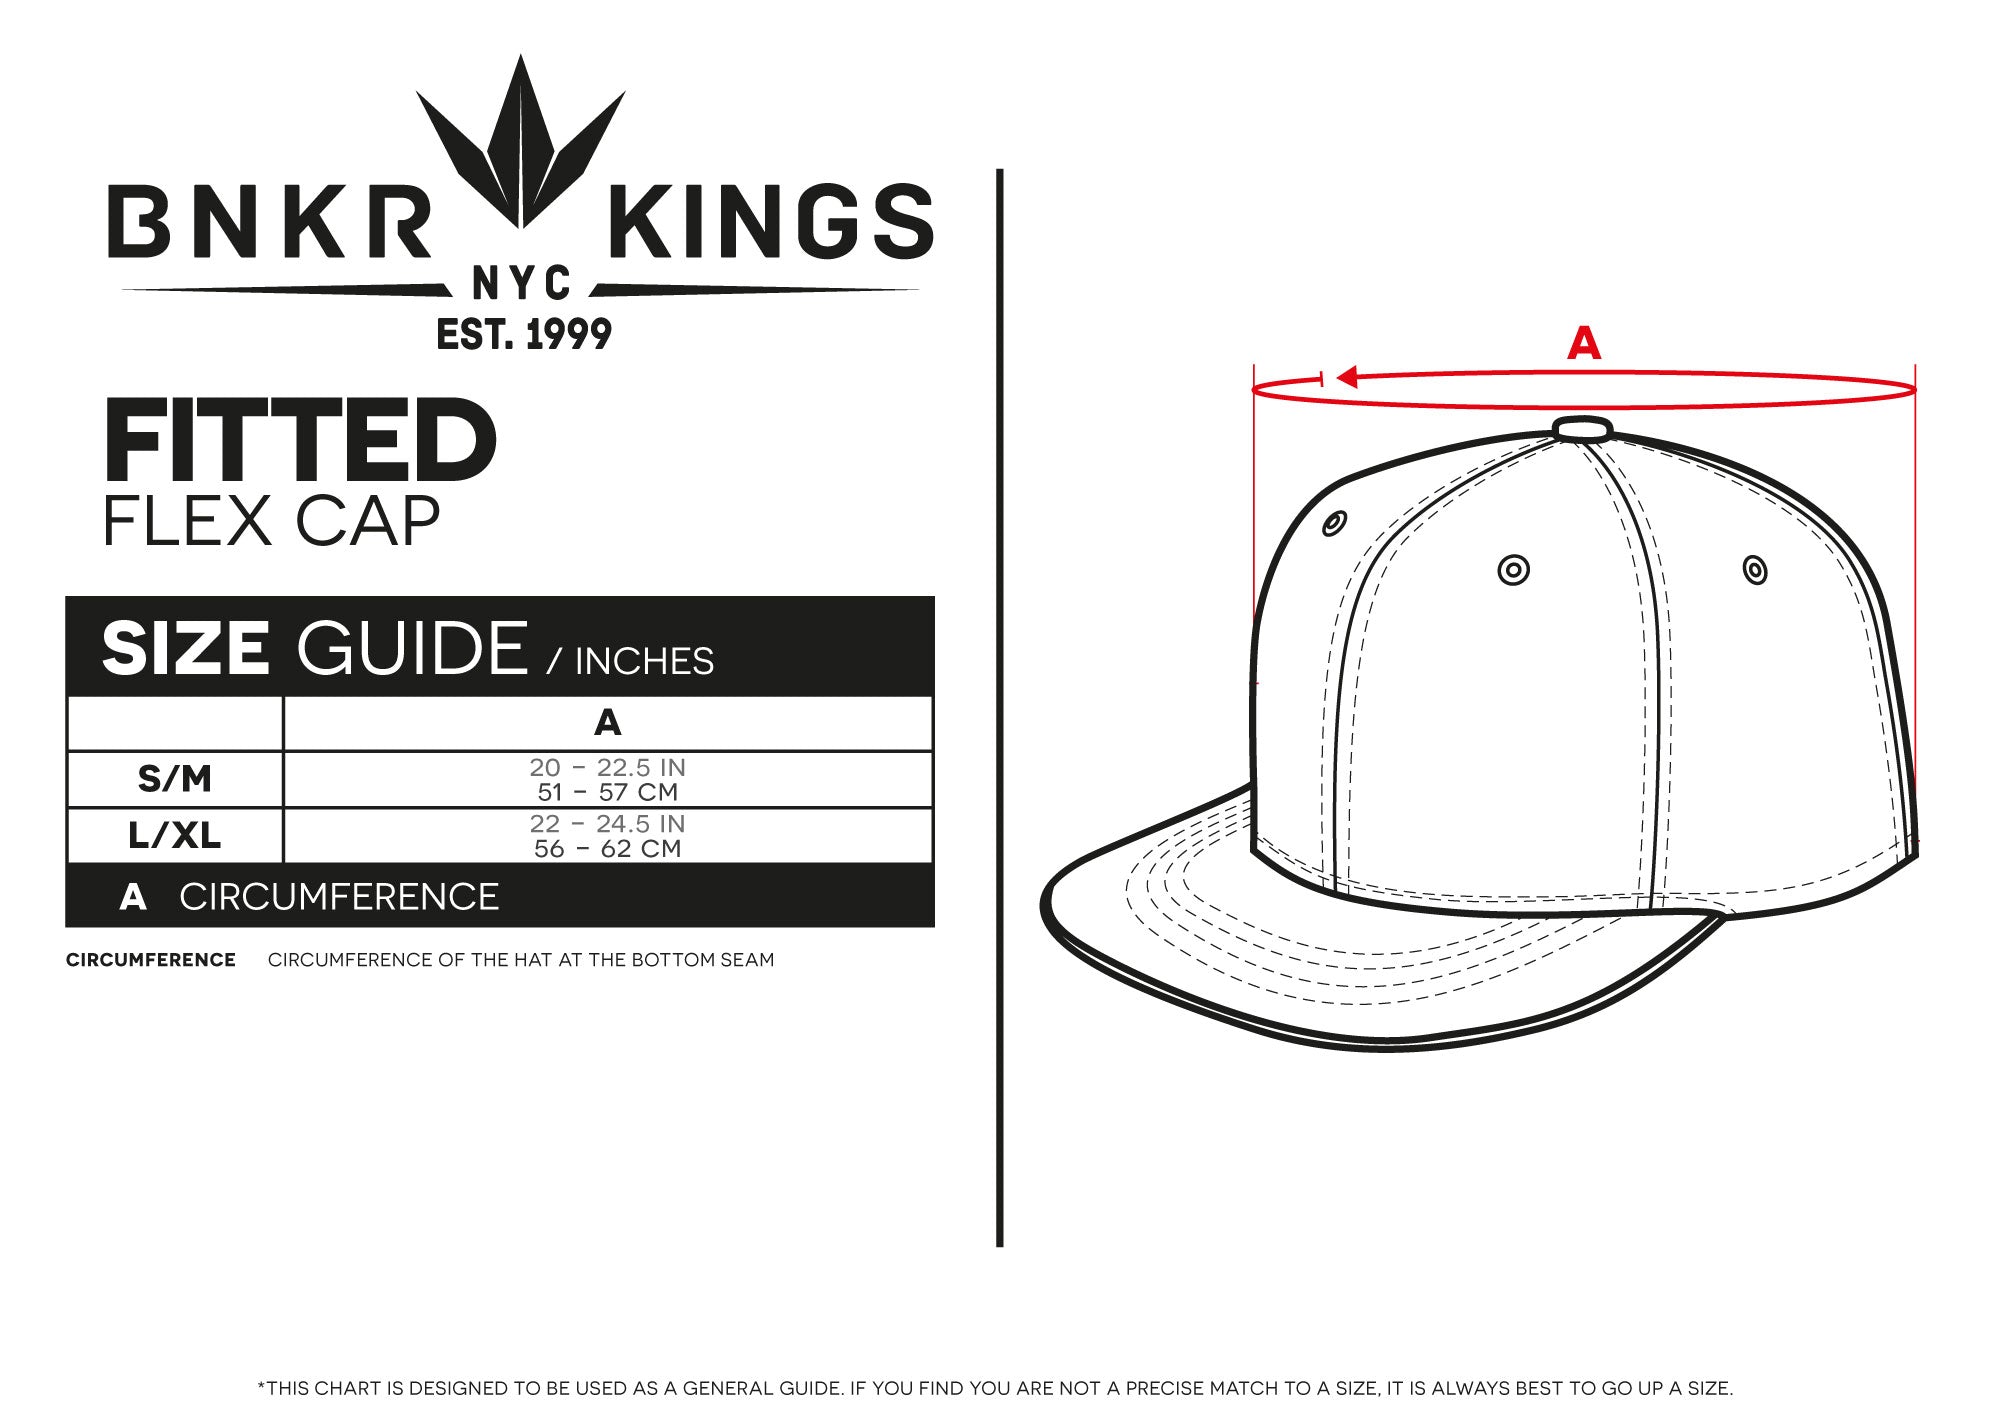 Hat Size Guide, Find The Perfect Fitting Hat